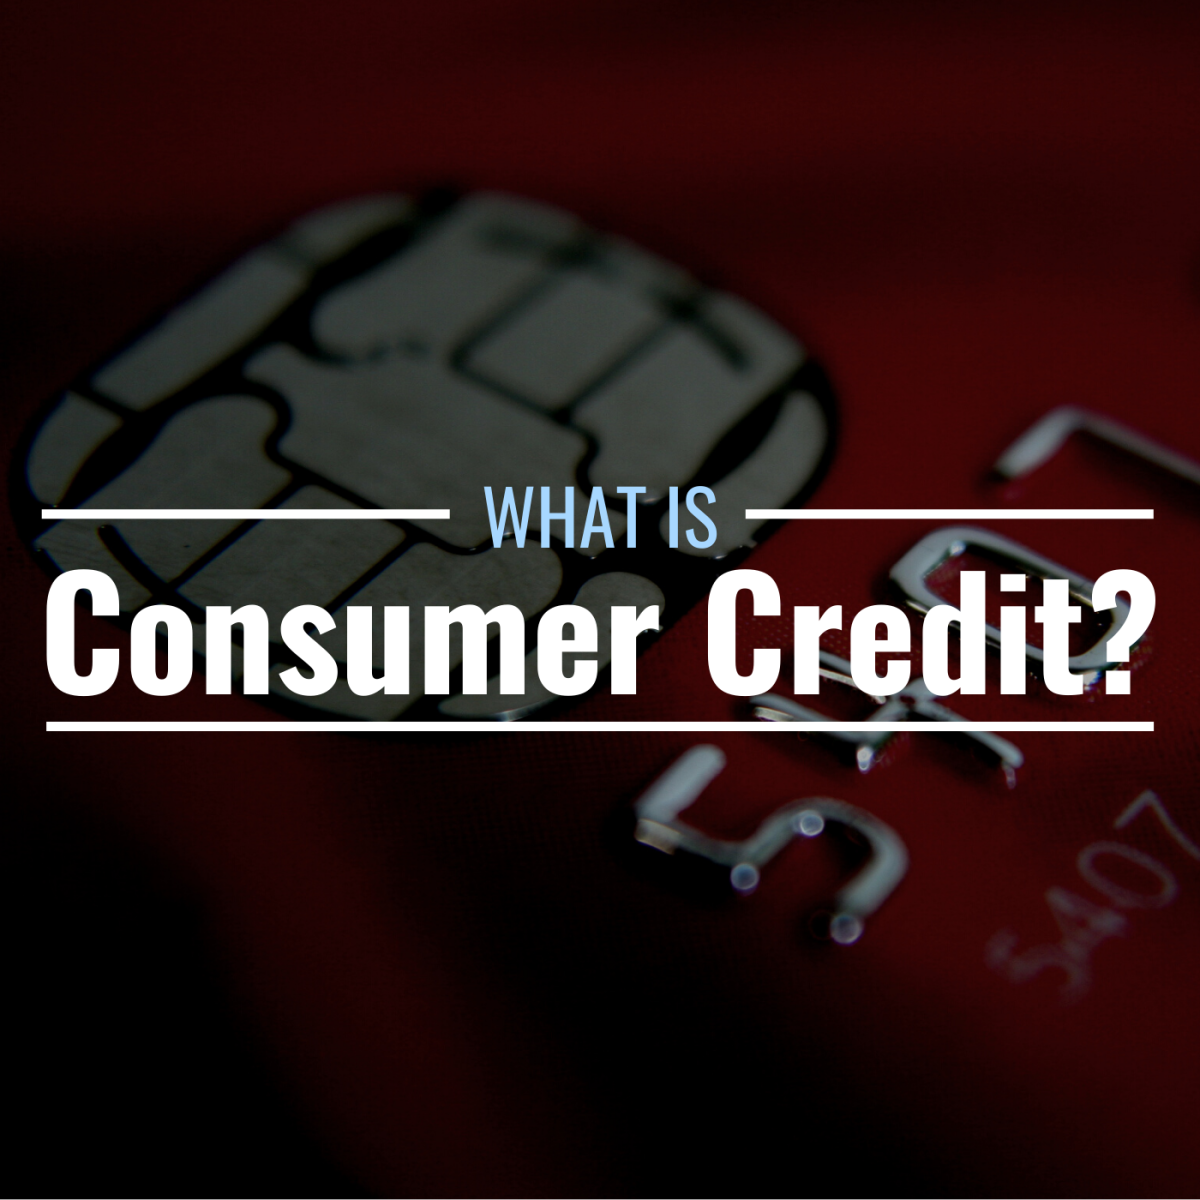 Photo of a credit card with a chip, with text overlay that reads "What Is Consumer Credit?"